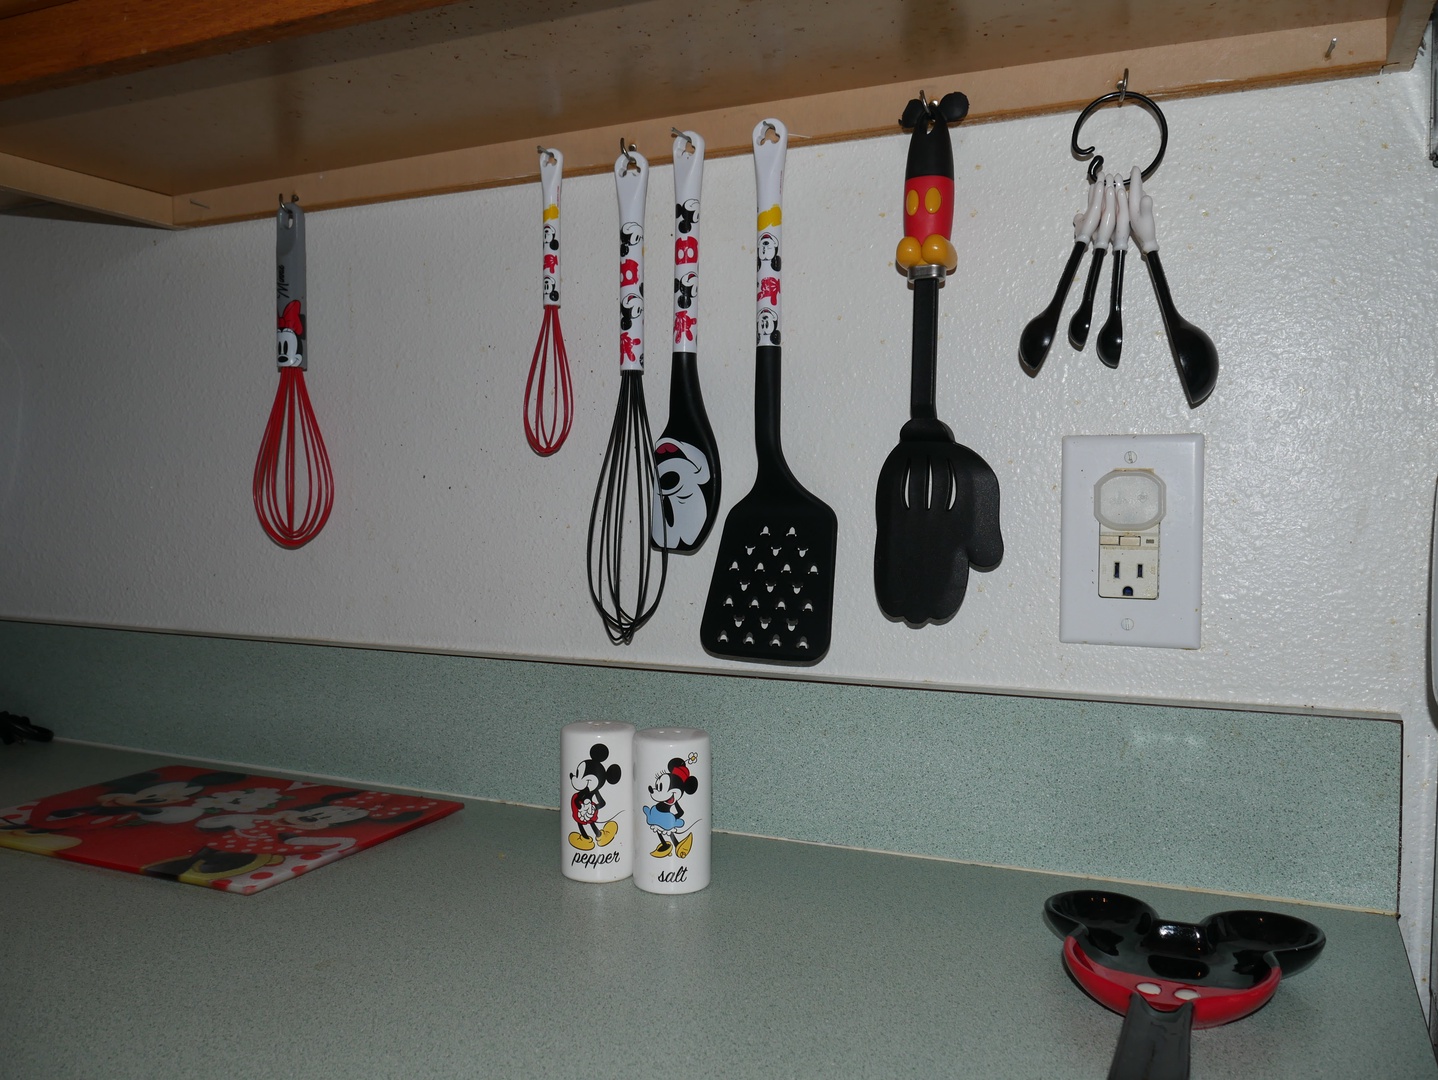 Fully equipped with all your basic kitchen utensils to make you feel right at home